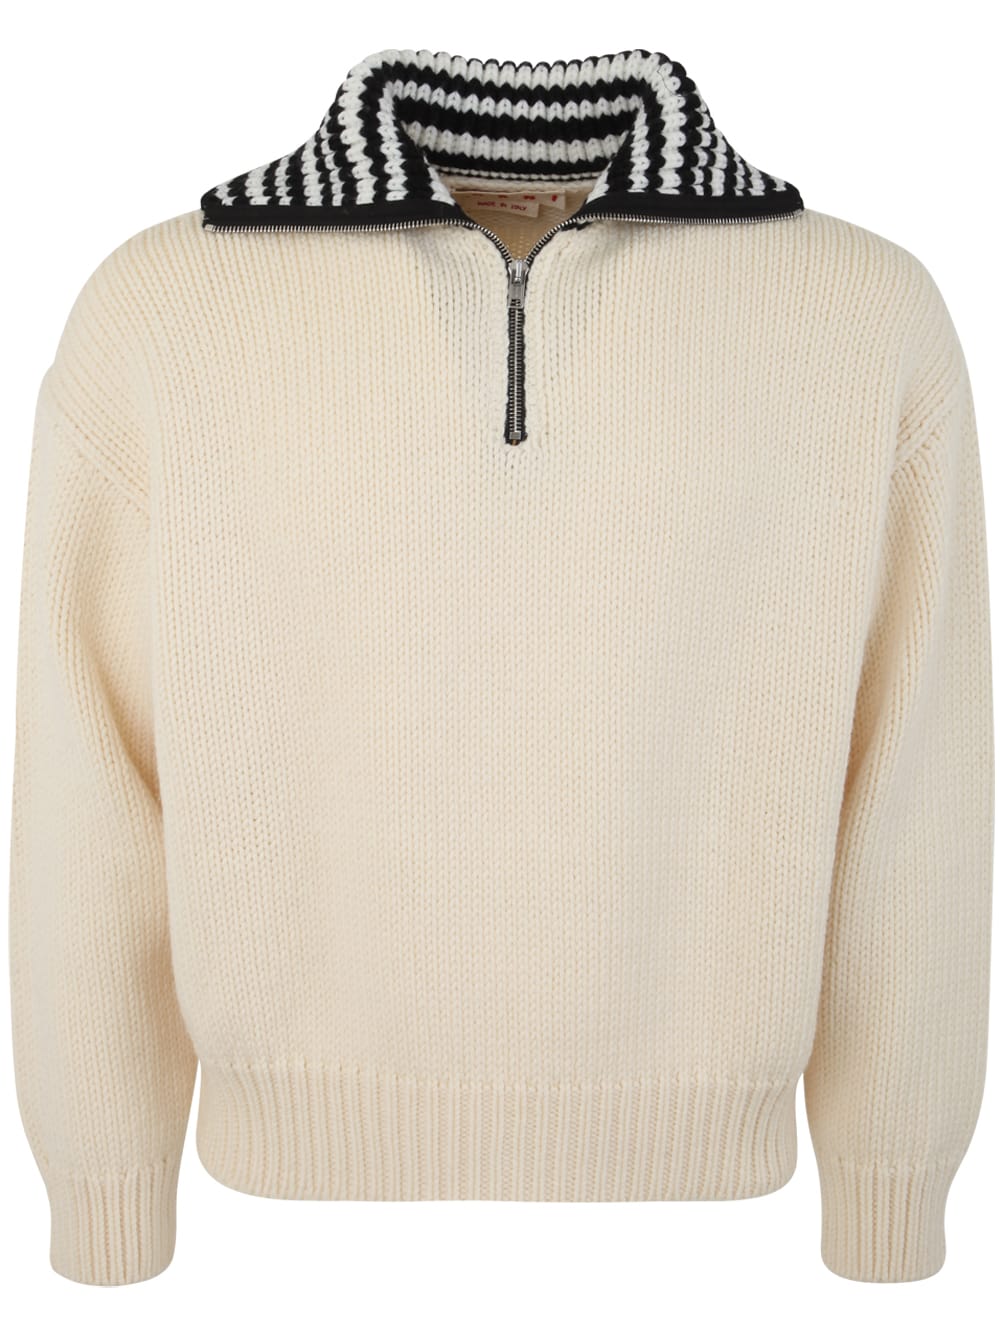 MARNI LONG SLEEVED TURTLE NECK BOXY FIT SWEATER WITH ZIP CLOSURE AND NECK STRIPES TWO TONE